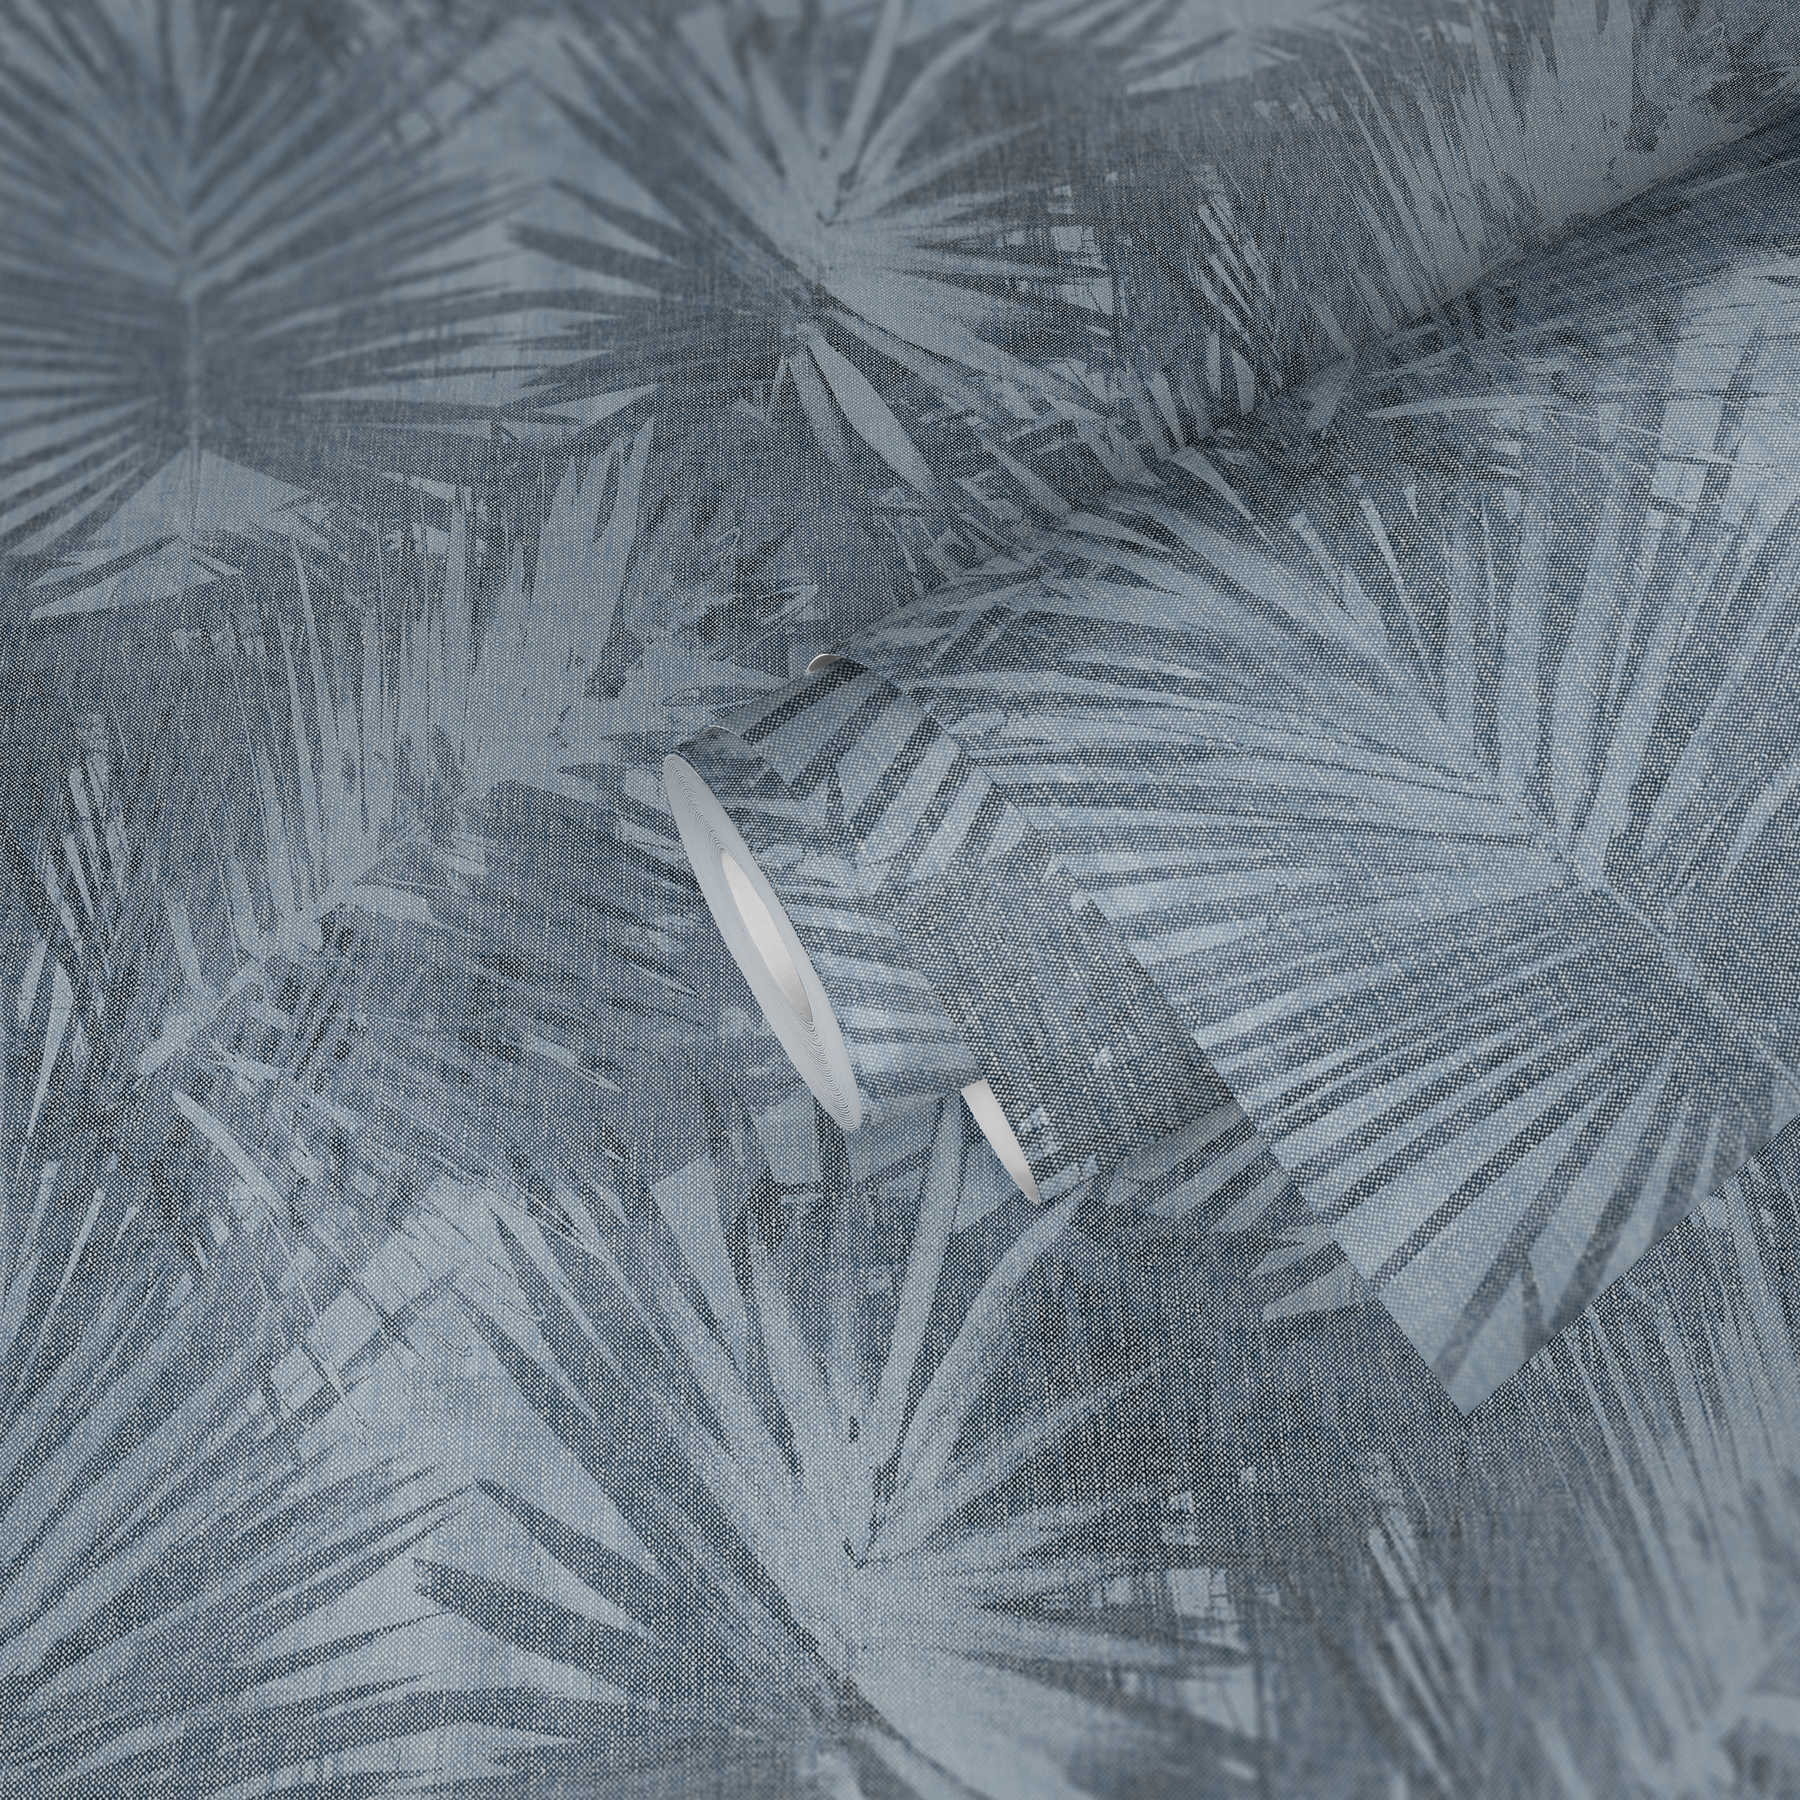             Linen look non-woven wallpaper with natural leaf pattern - blue
        